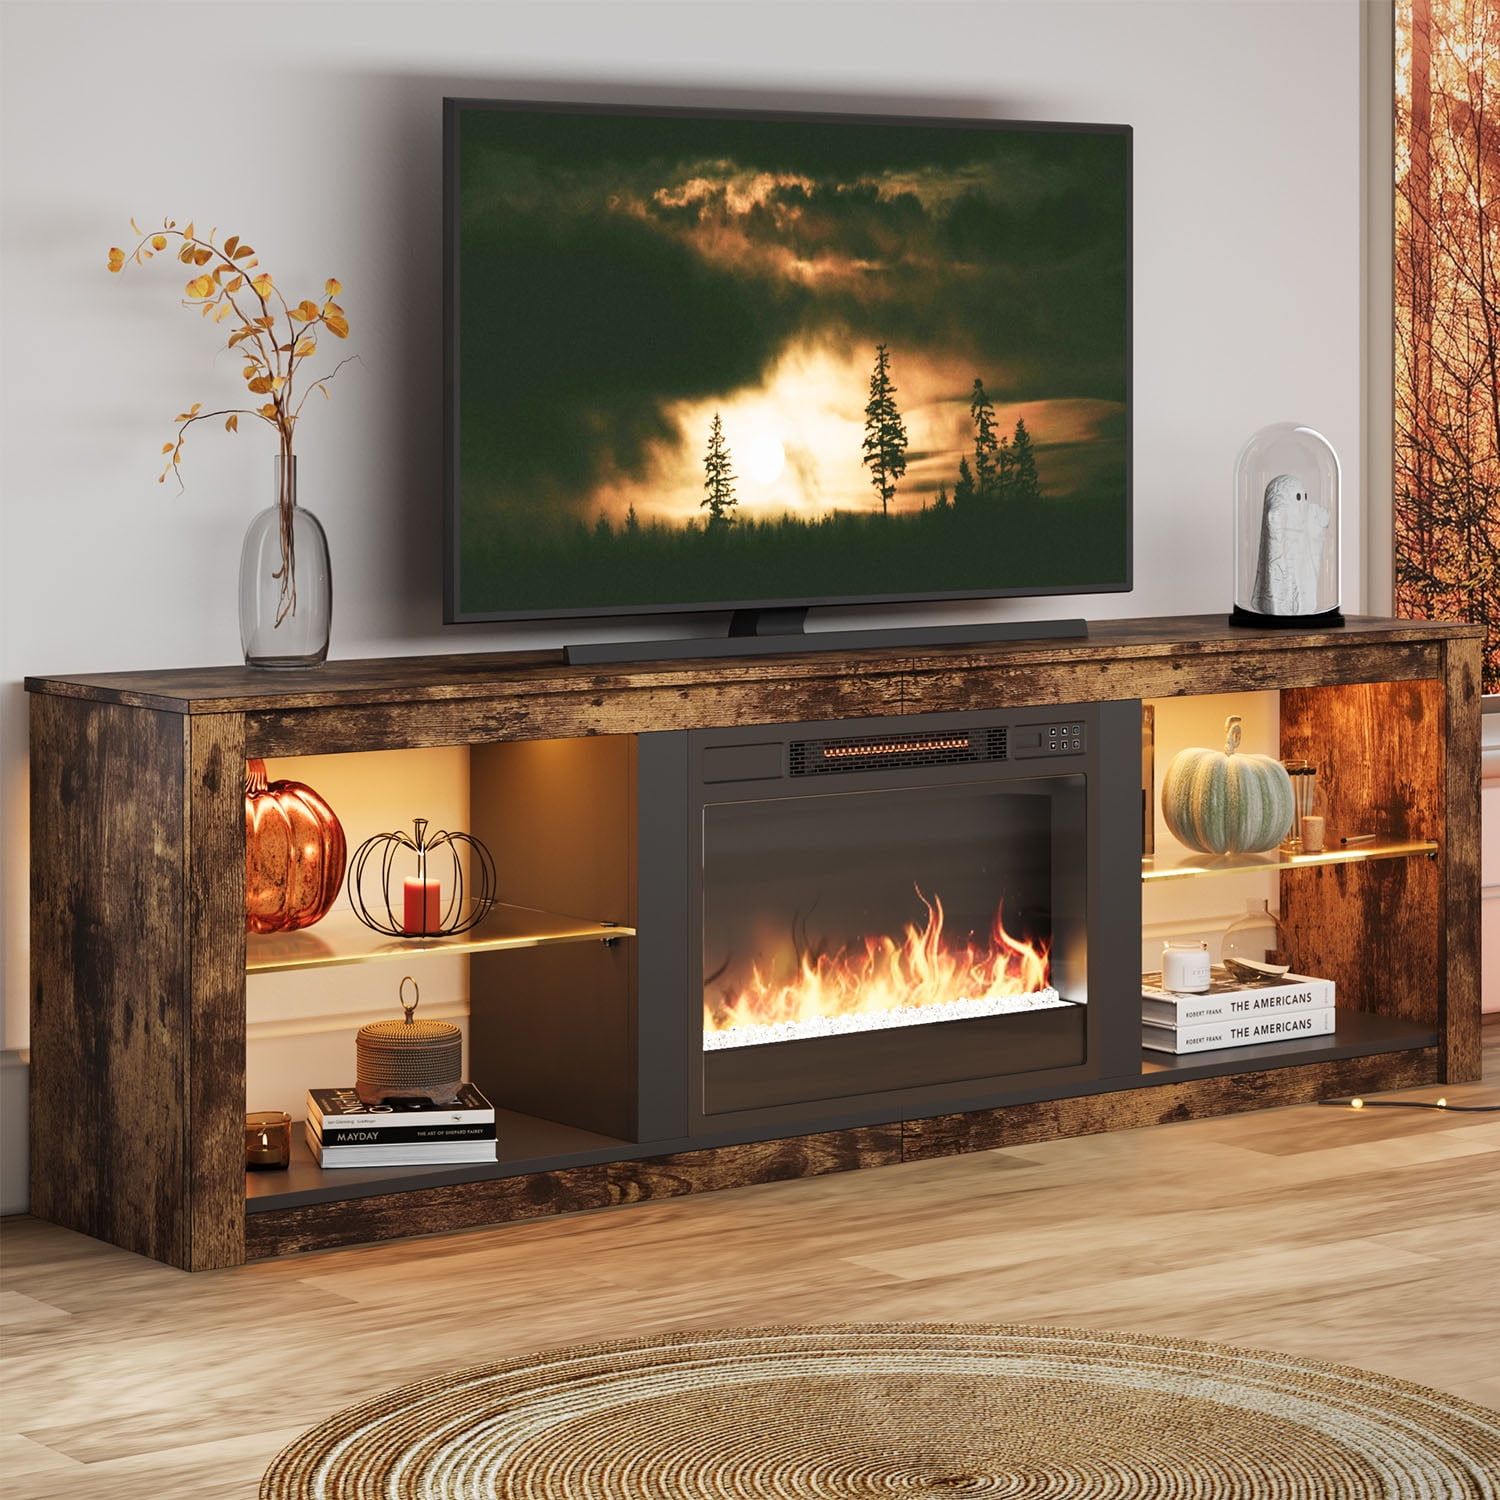 Bestier Fireplace Tv Stand With Led Lights For Tvs Up To 75",Rustic Brown  Finish – Walmart Regarding Bestier Tv Stand For Tvs Up To 75" (View 2 of 15)